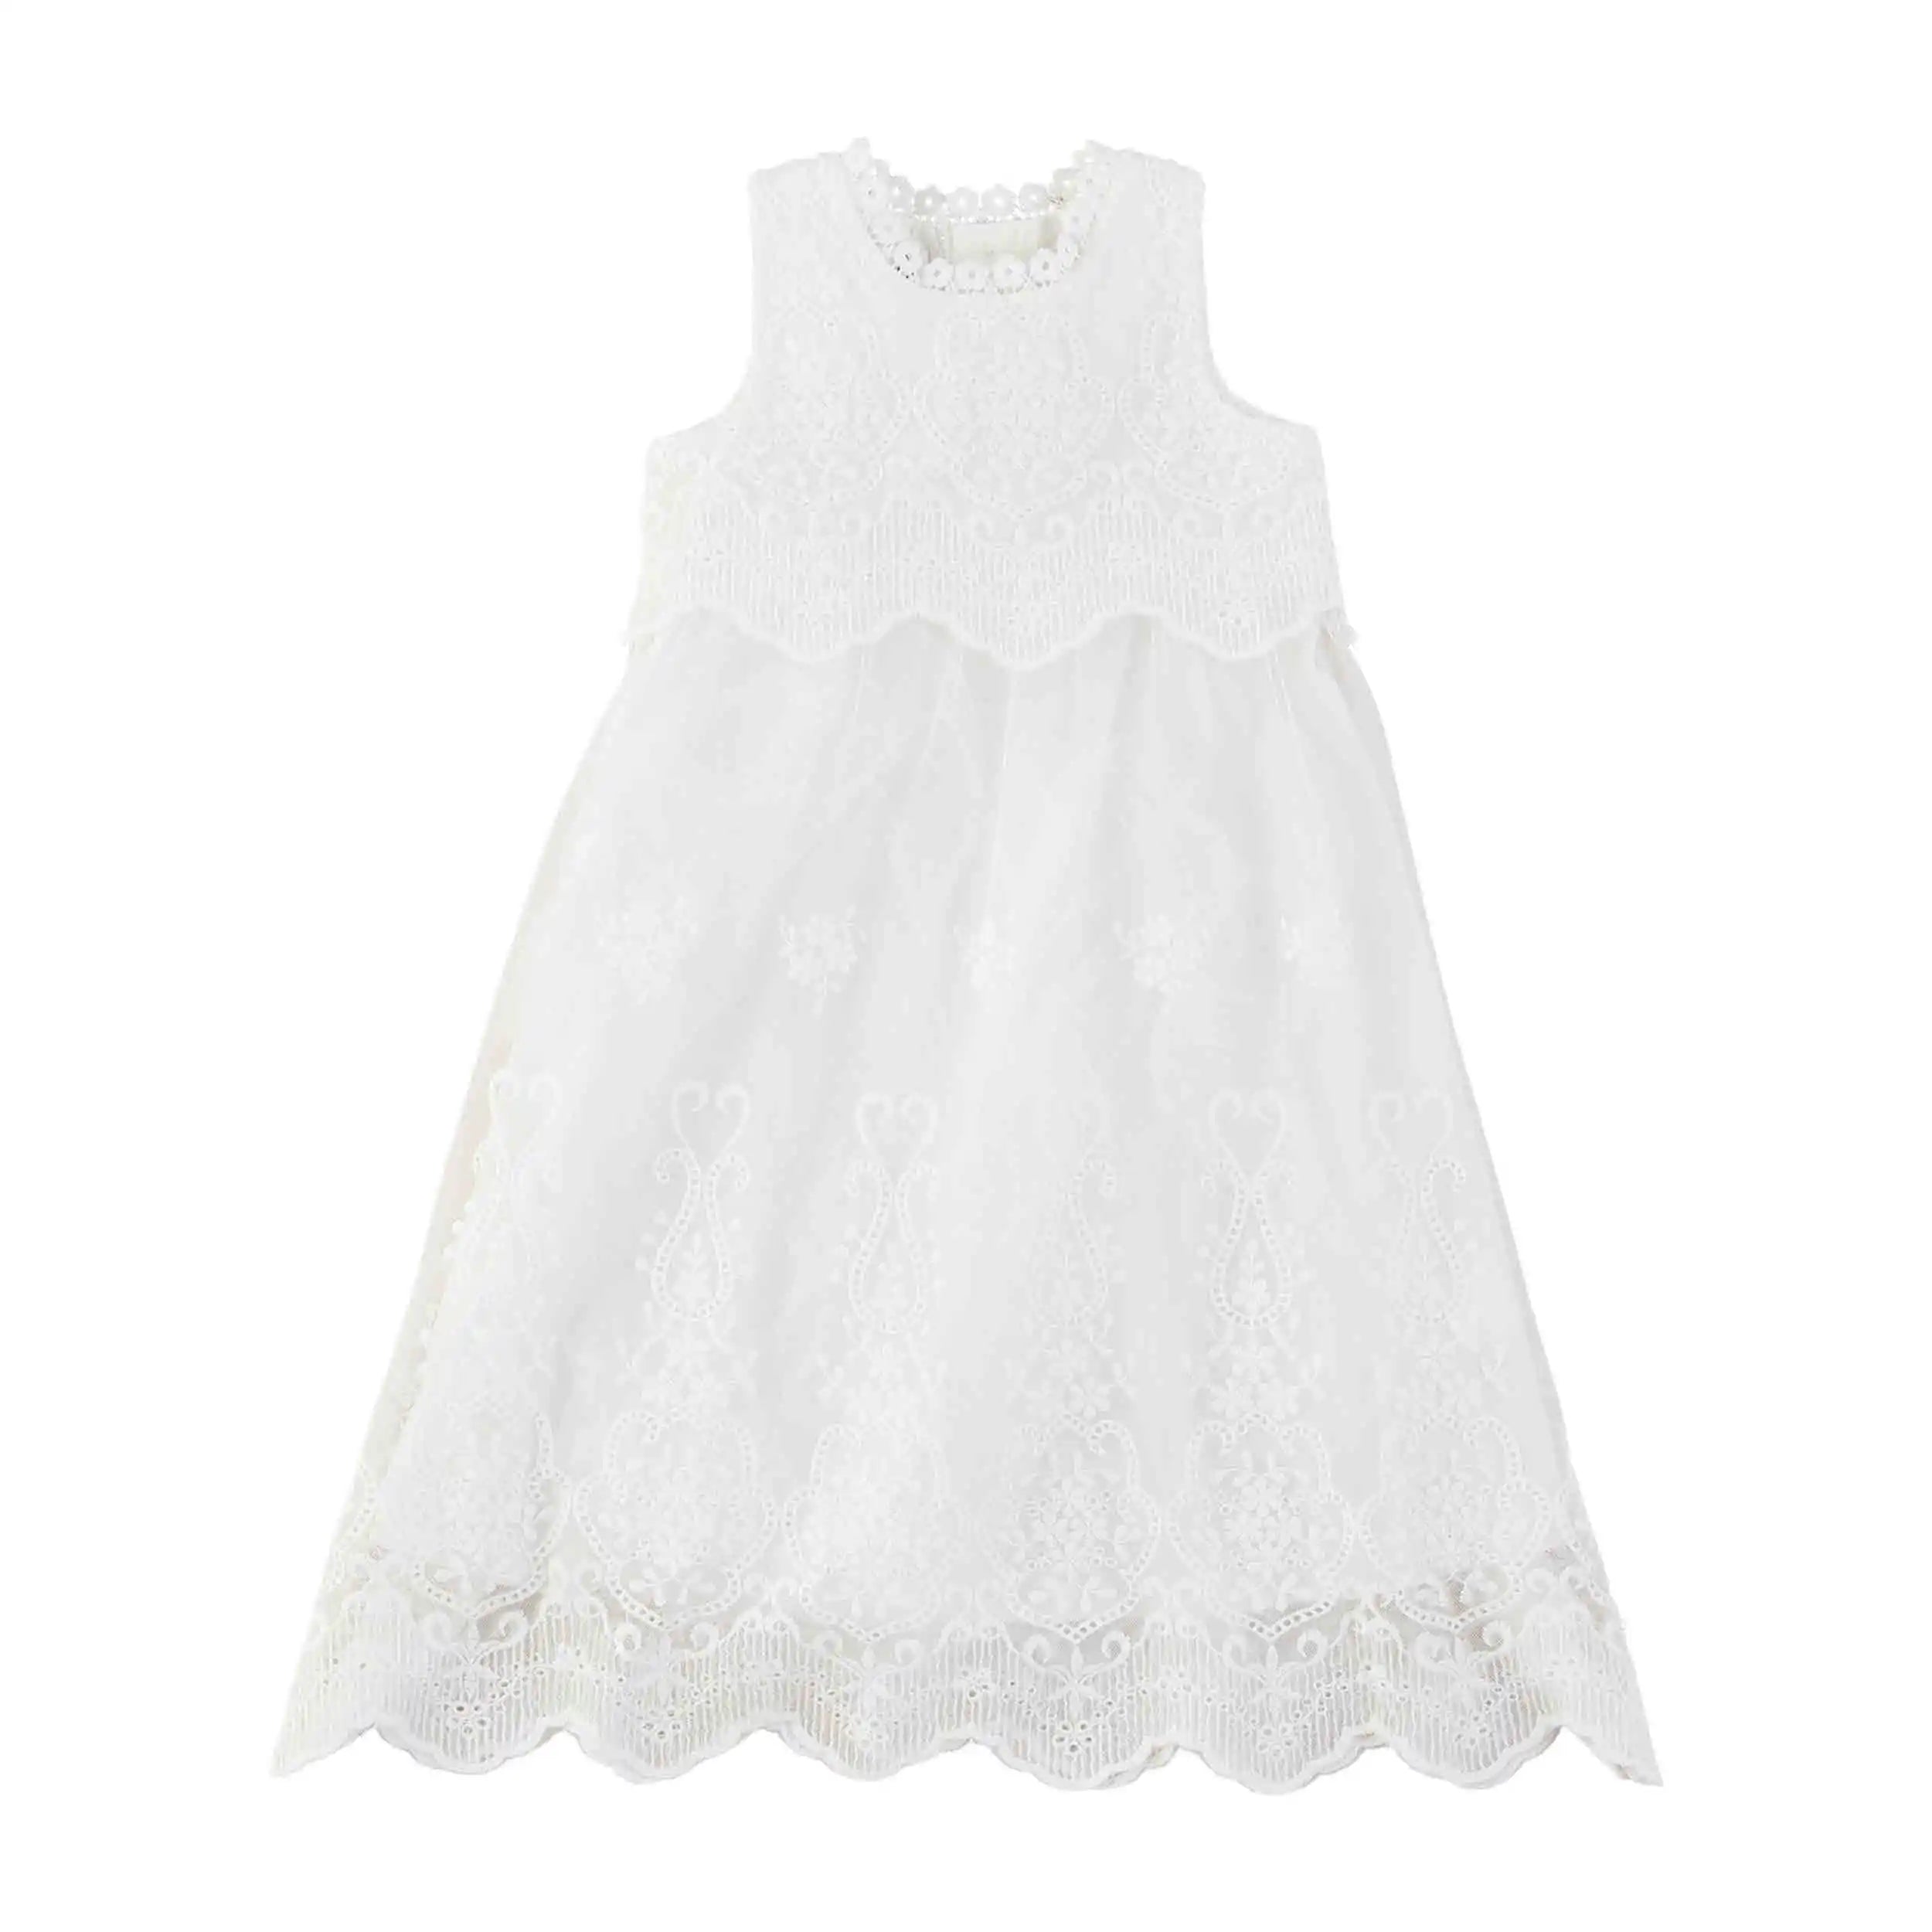 CLASSIC CHRISTENING GOWN